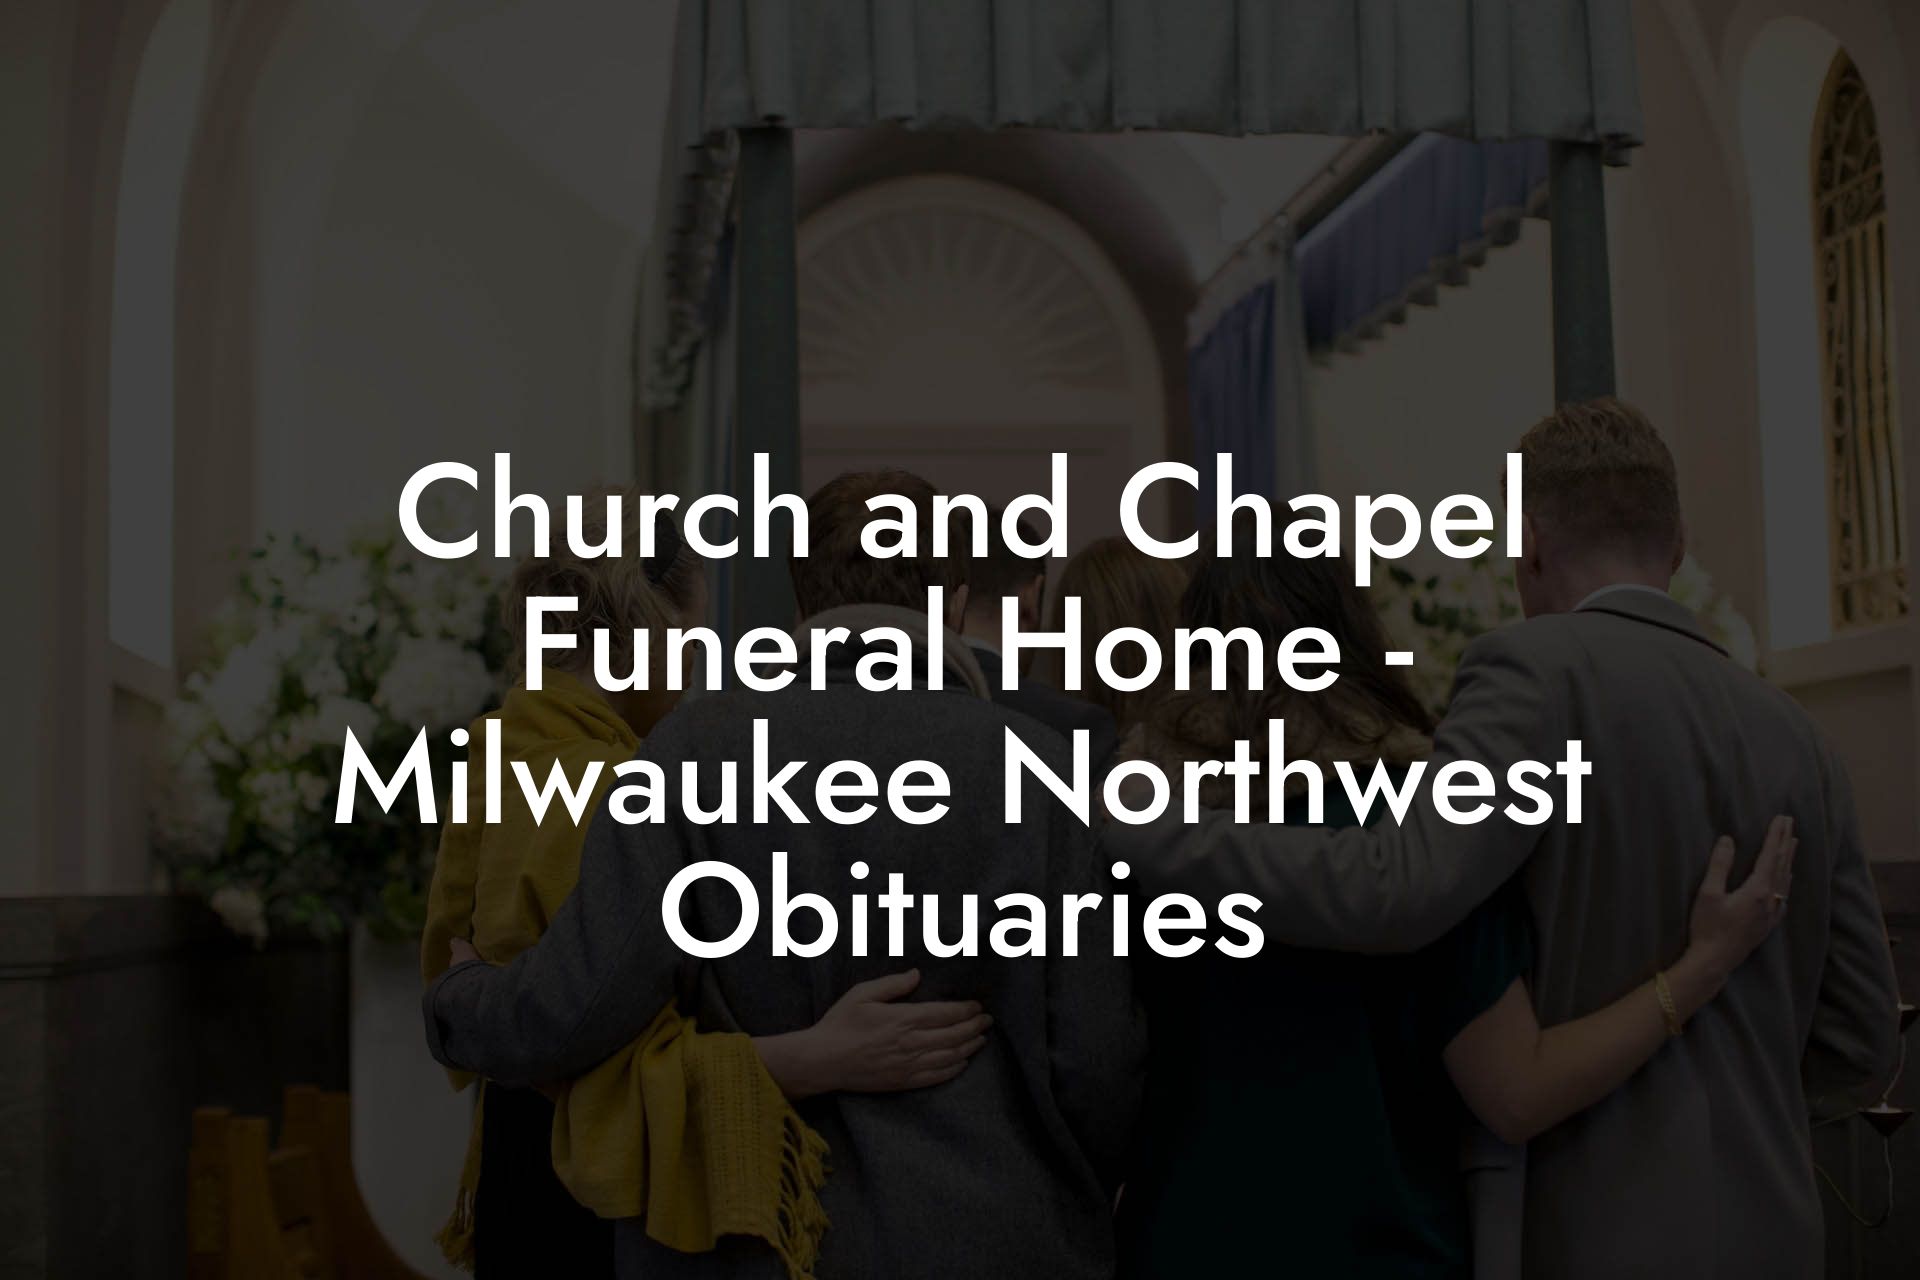 Church and Chapel Funeral Home - Milwaukee Northwest Obituaries